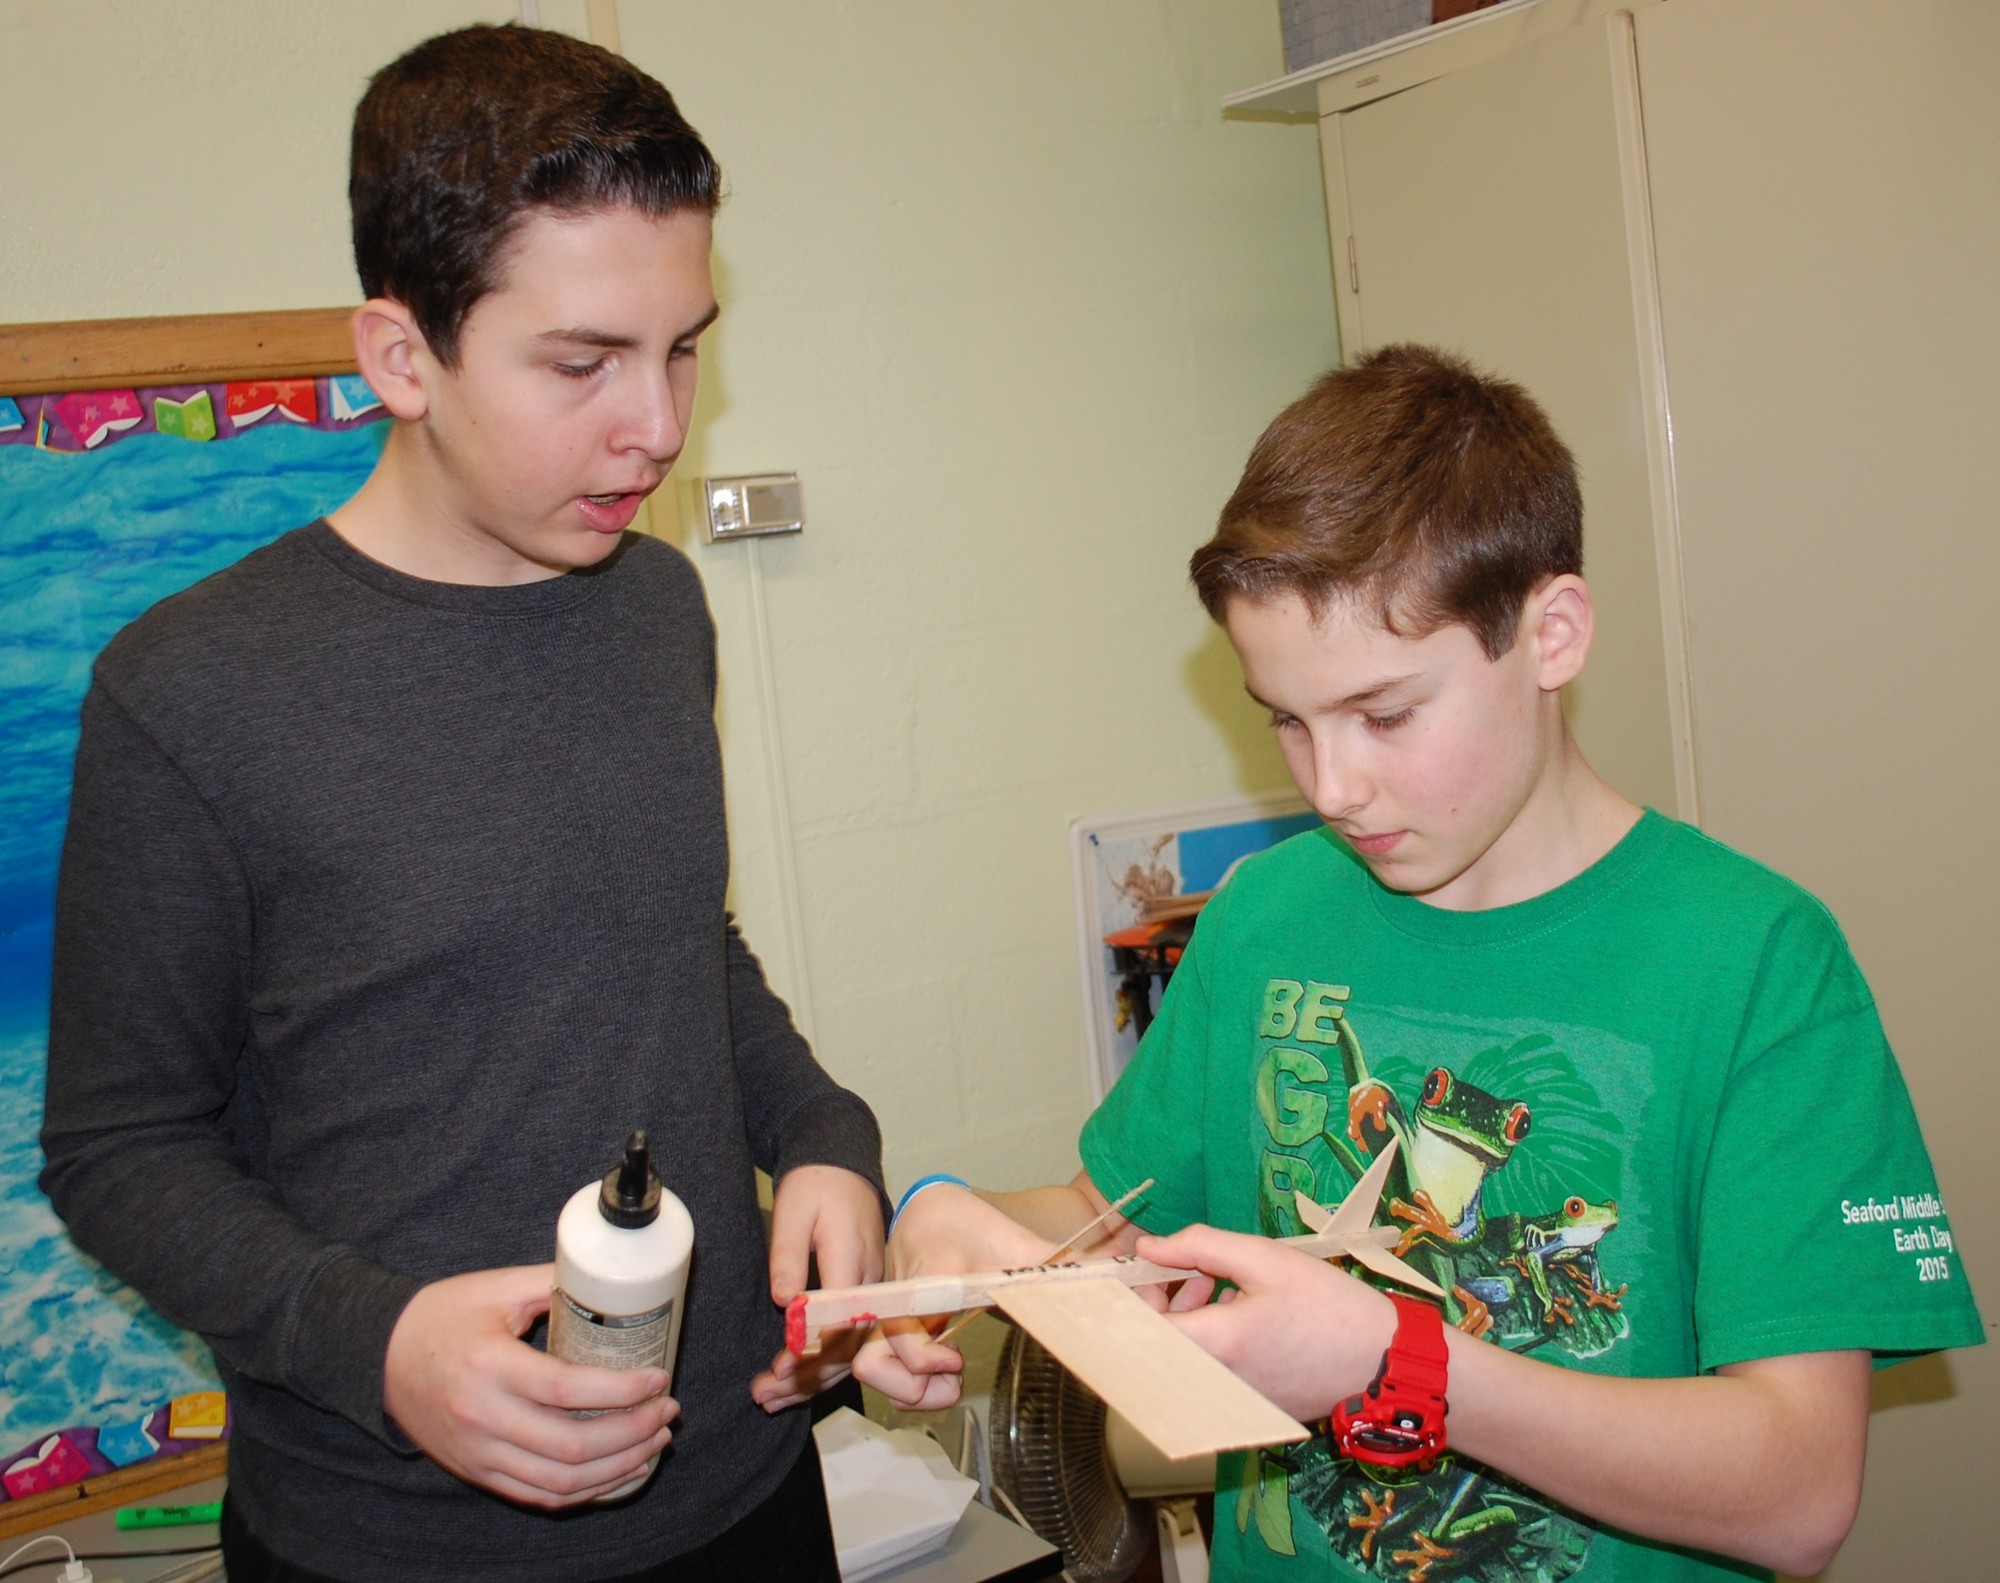 Seaford Middle School students Joe Abbate, left, and Ryan Demino put the finishing touches on their rubberband-powered airplane.